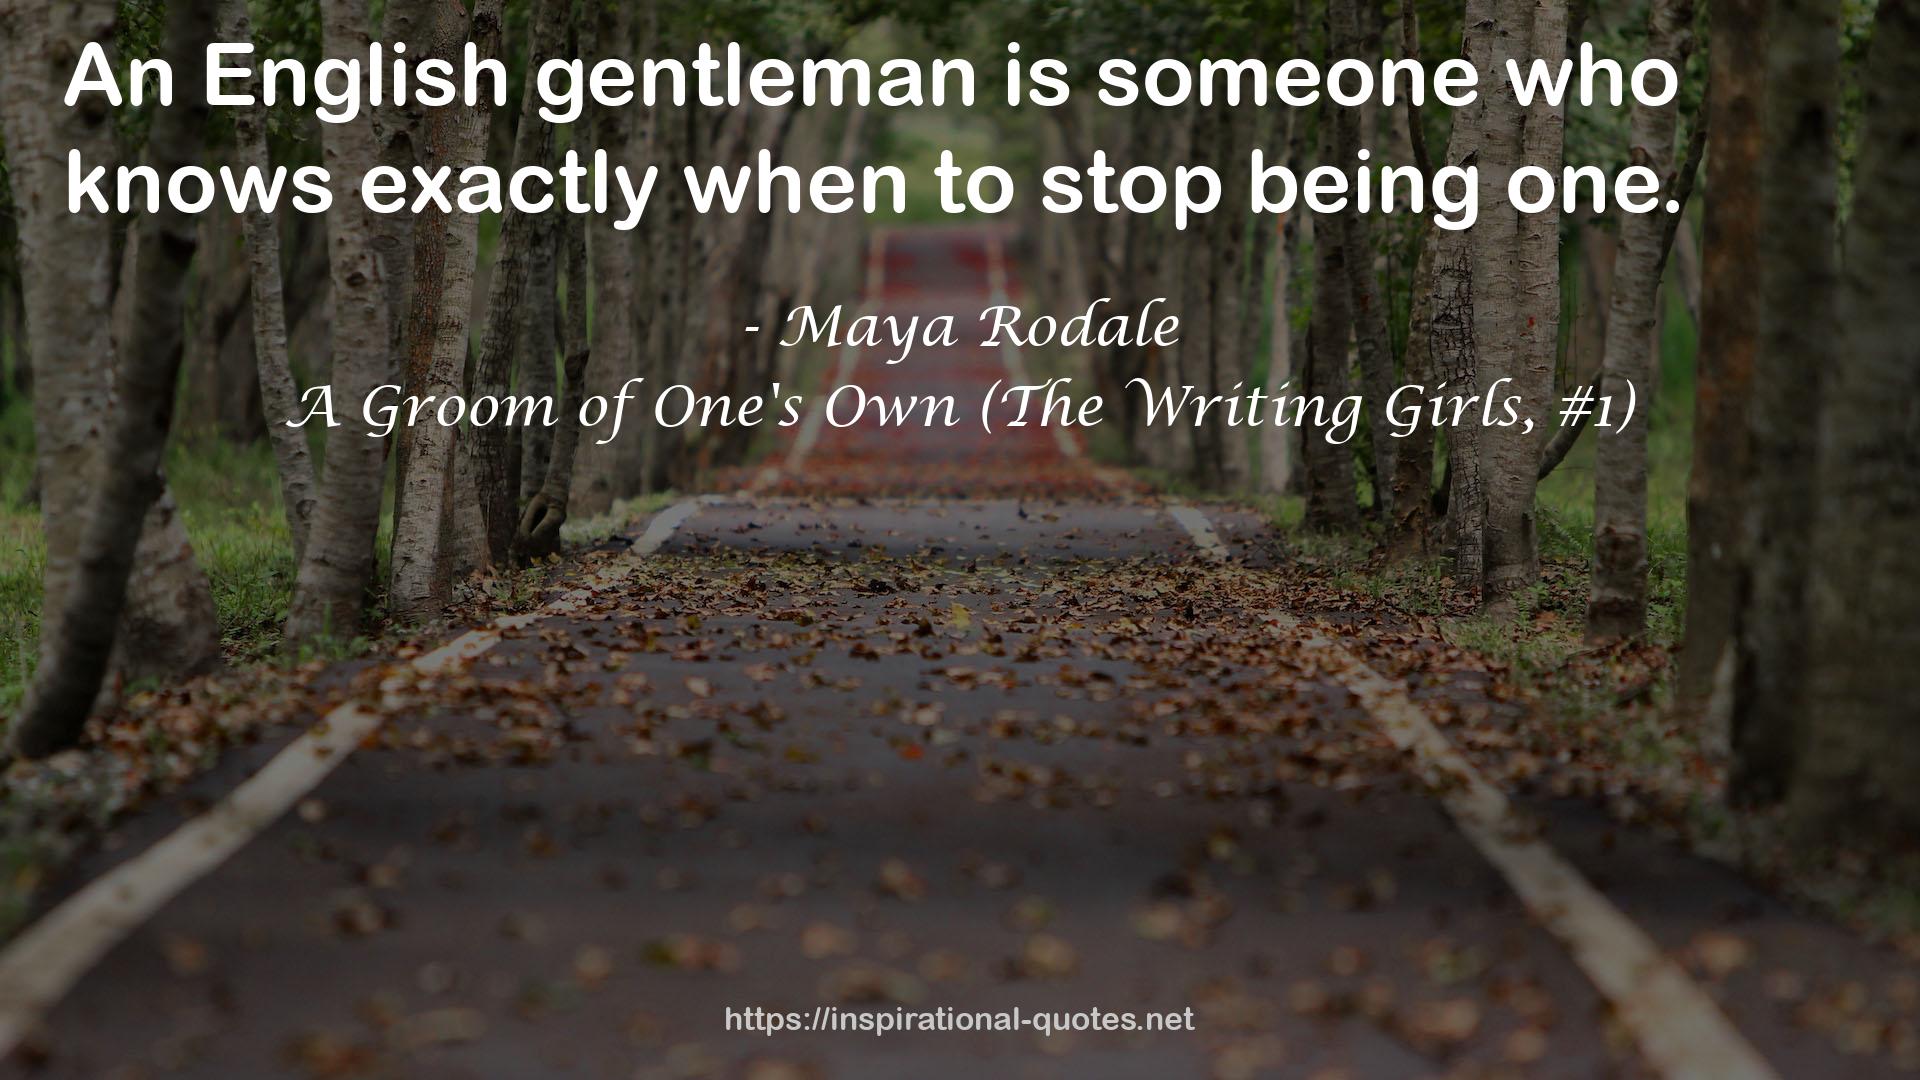 A Groom of One's Own (The Writing Girls, #1) QUOTES